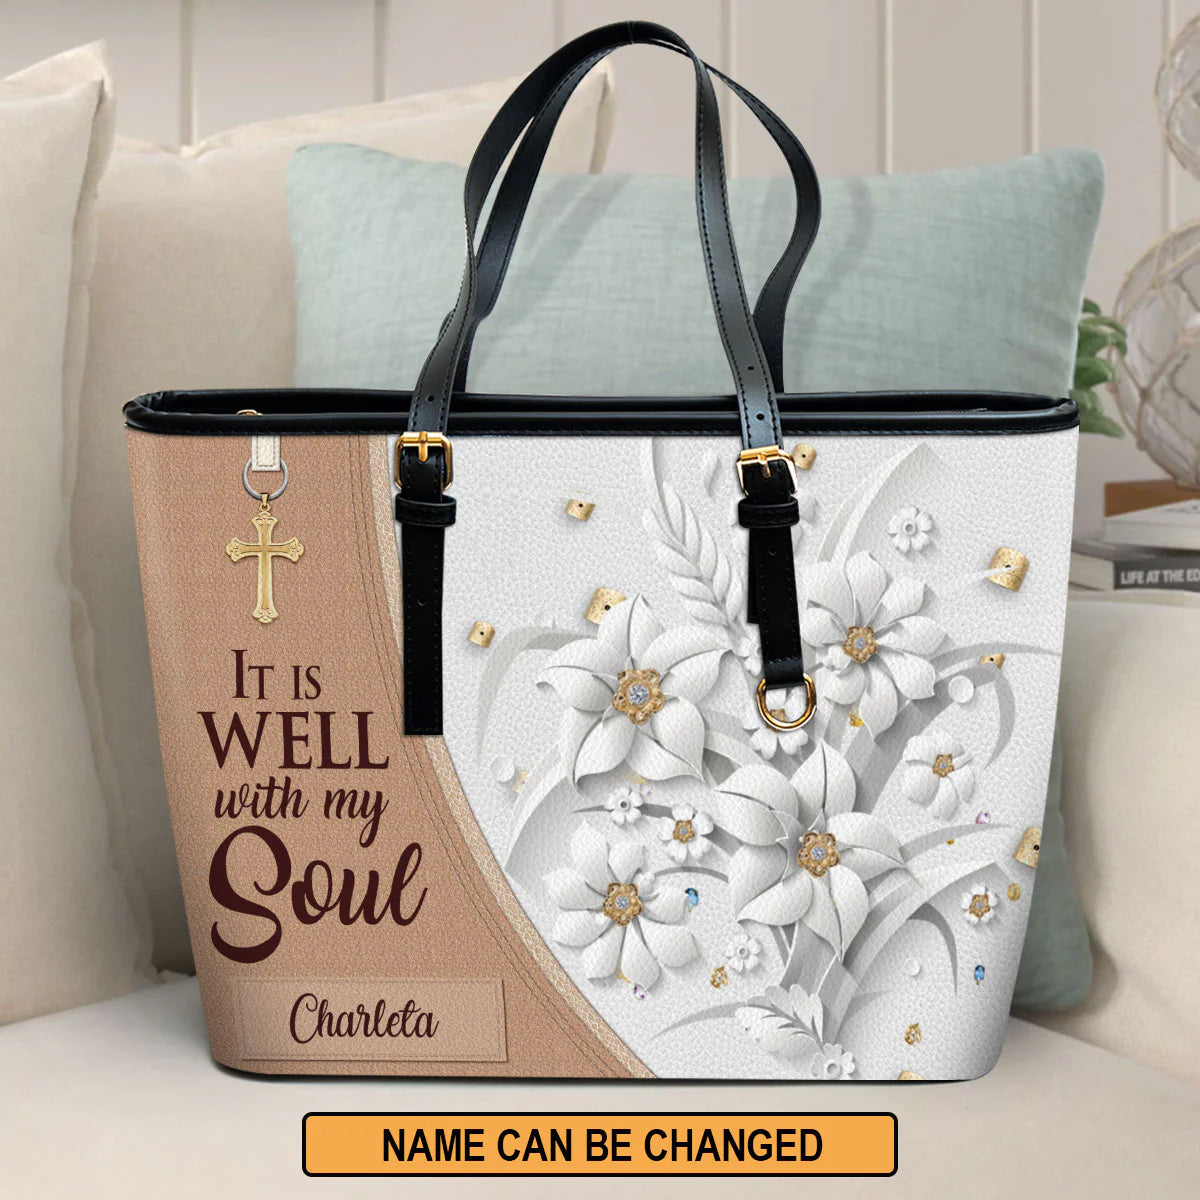 Christianart Designer Handbags, It Is Well With My Soul, Personalized Gifts, Gifts for Women. - Christian Art Bag